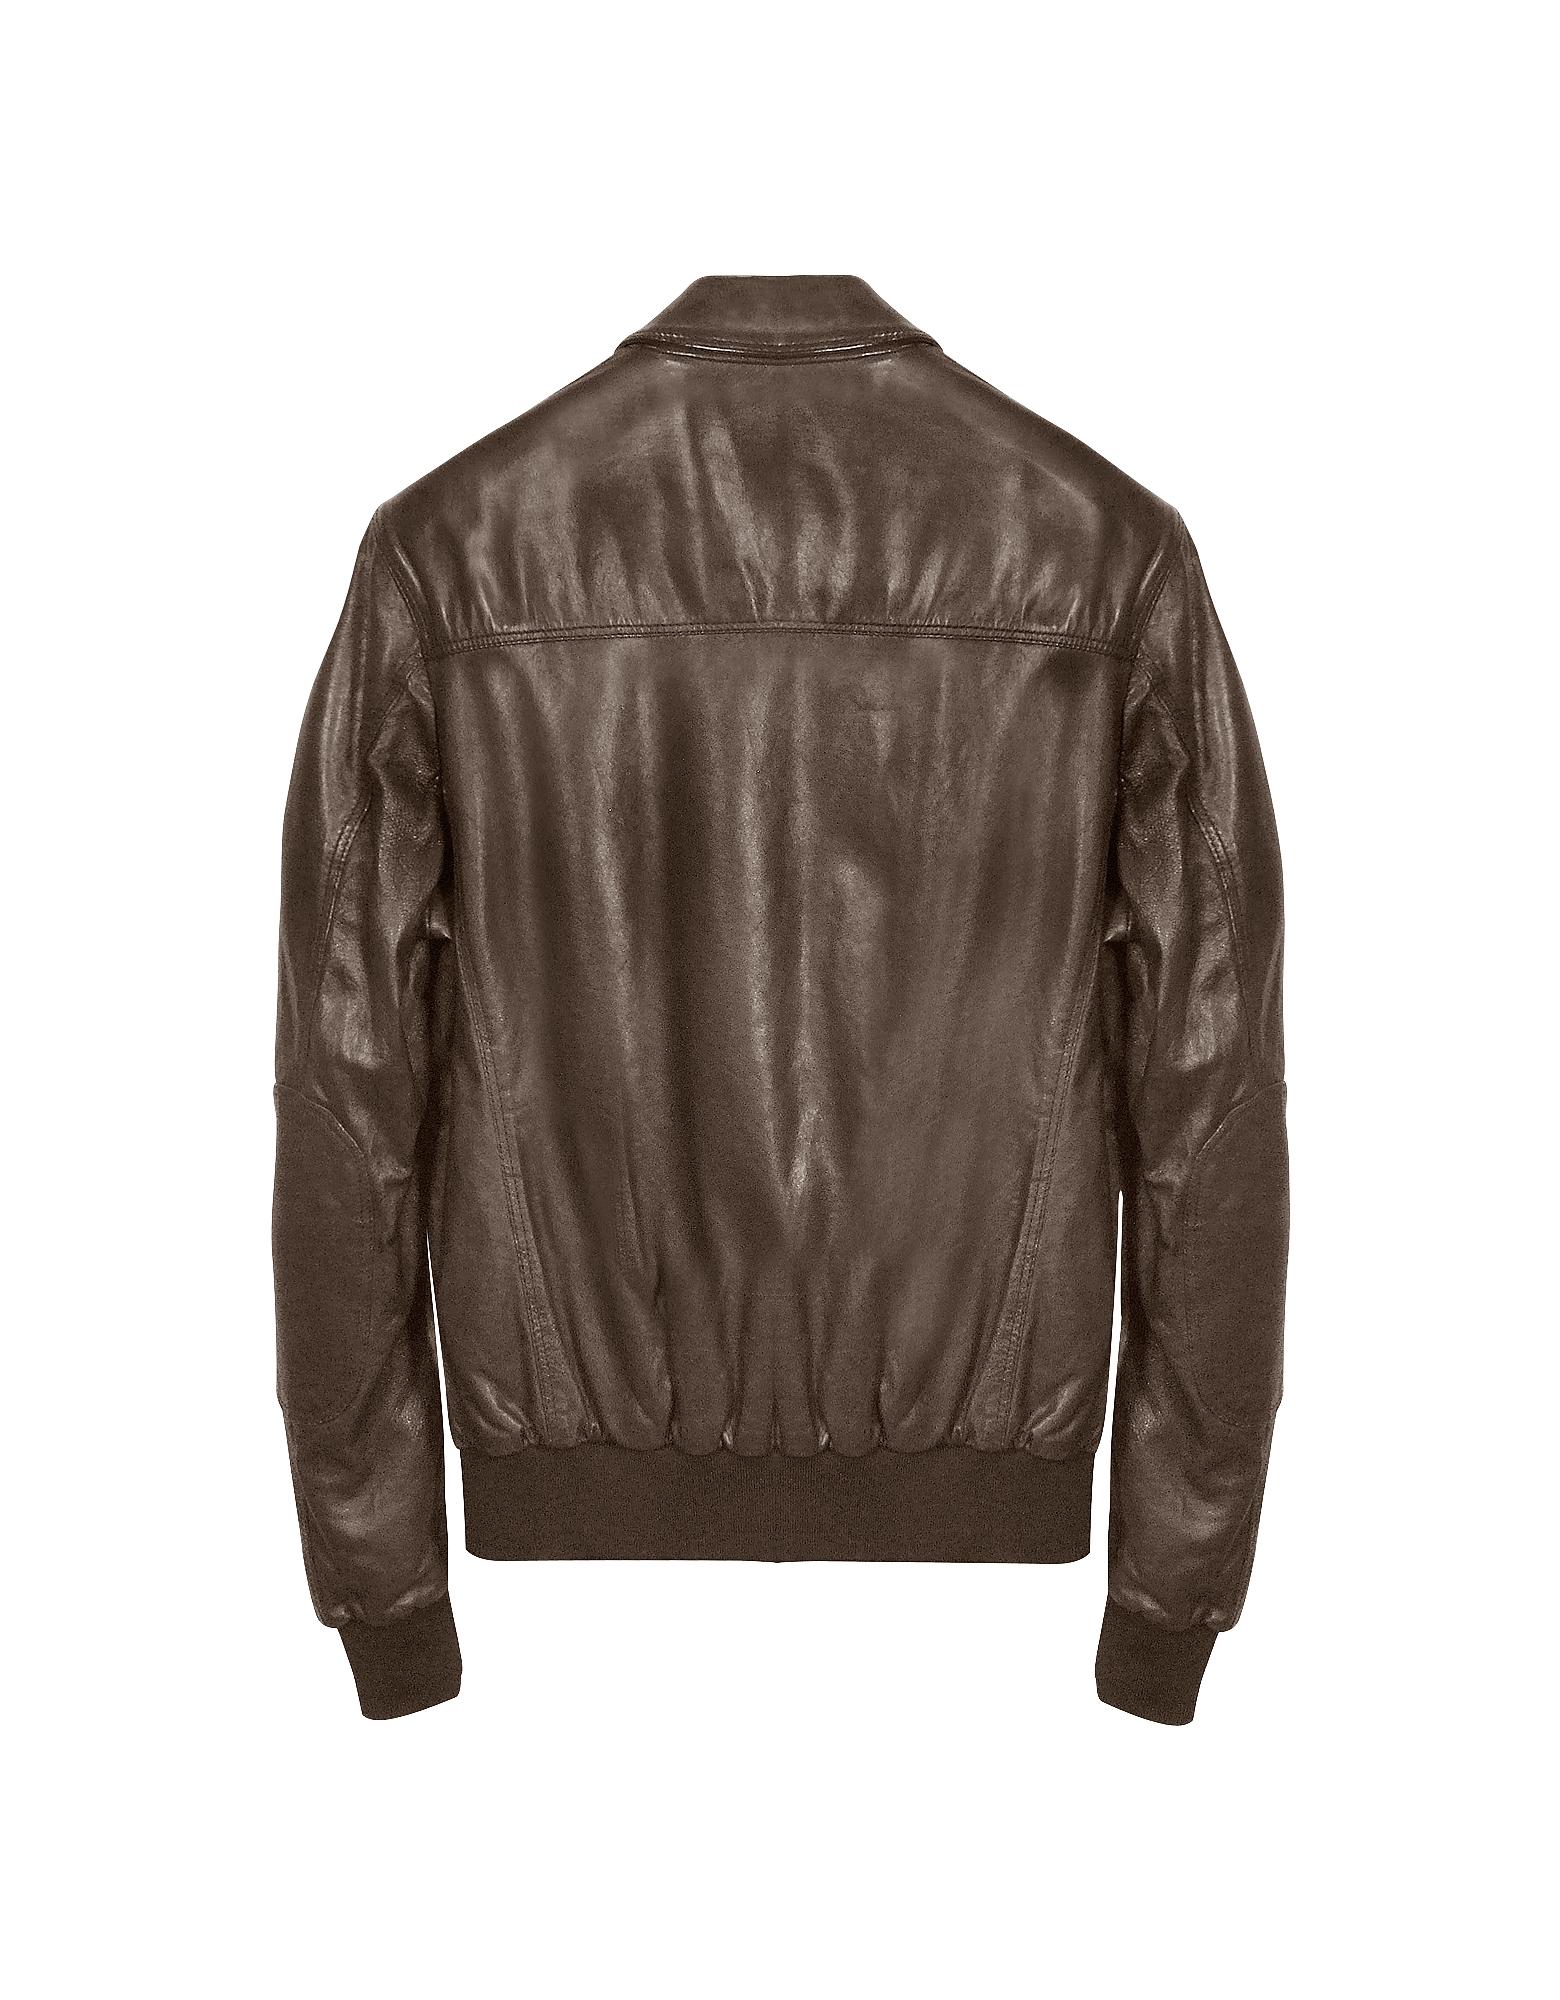 Lyst - Forzieri Dark Brown Leather Bomber Jacket in Brown for Men